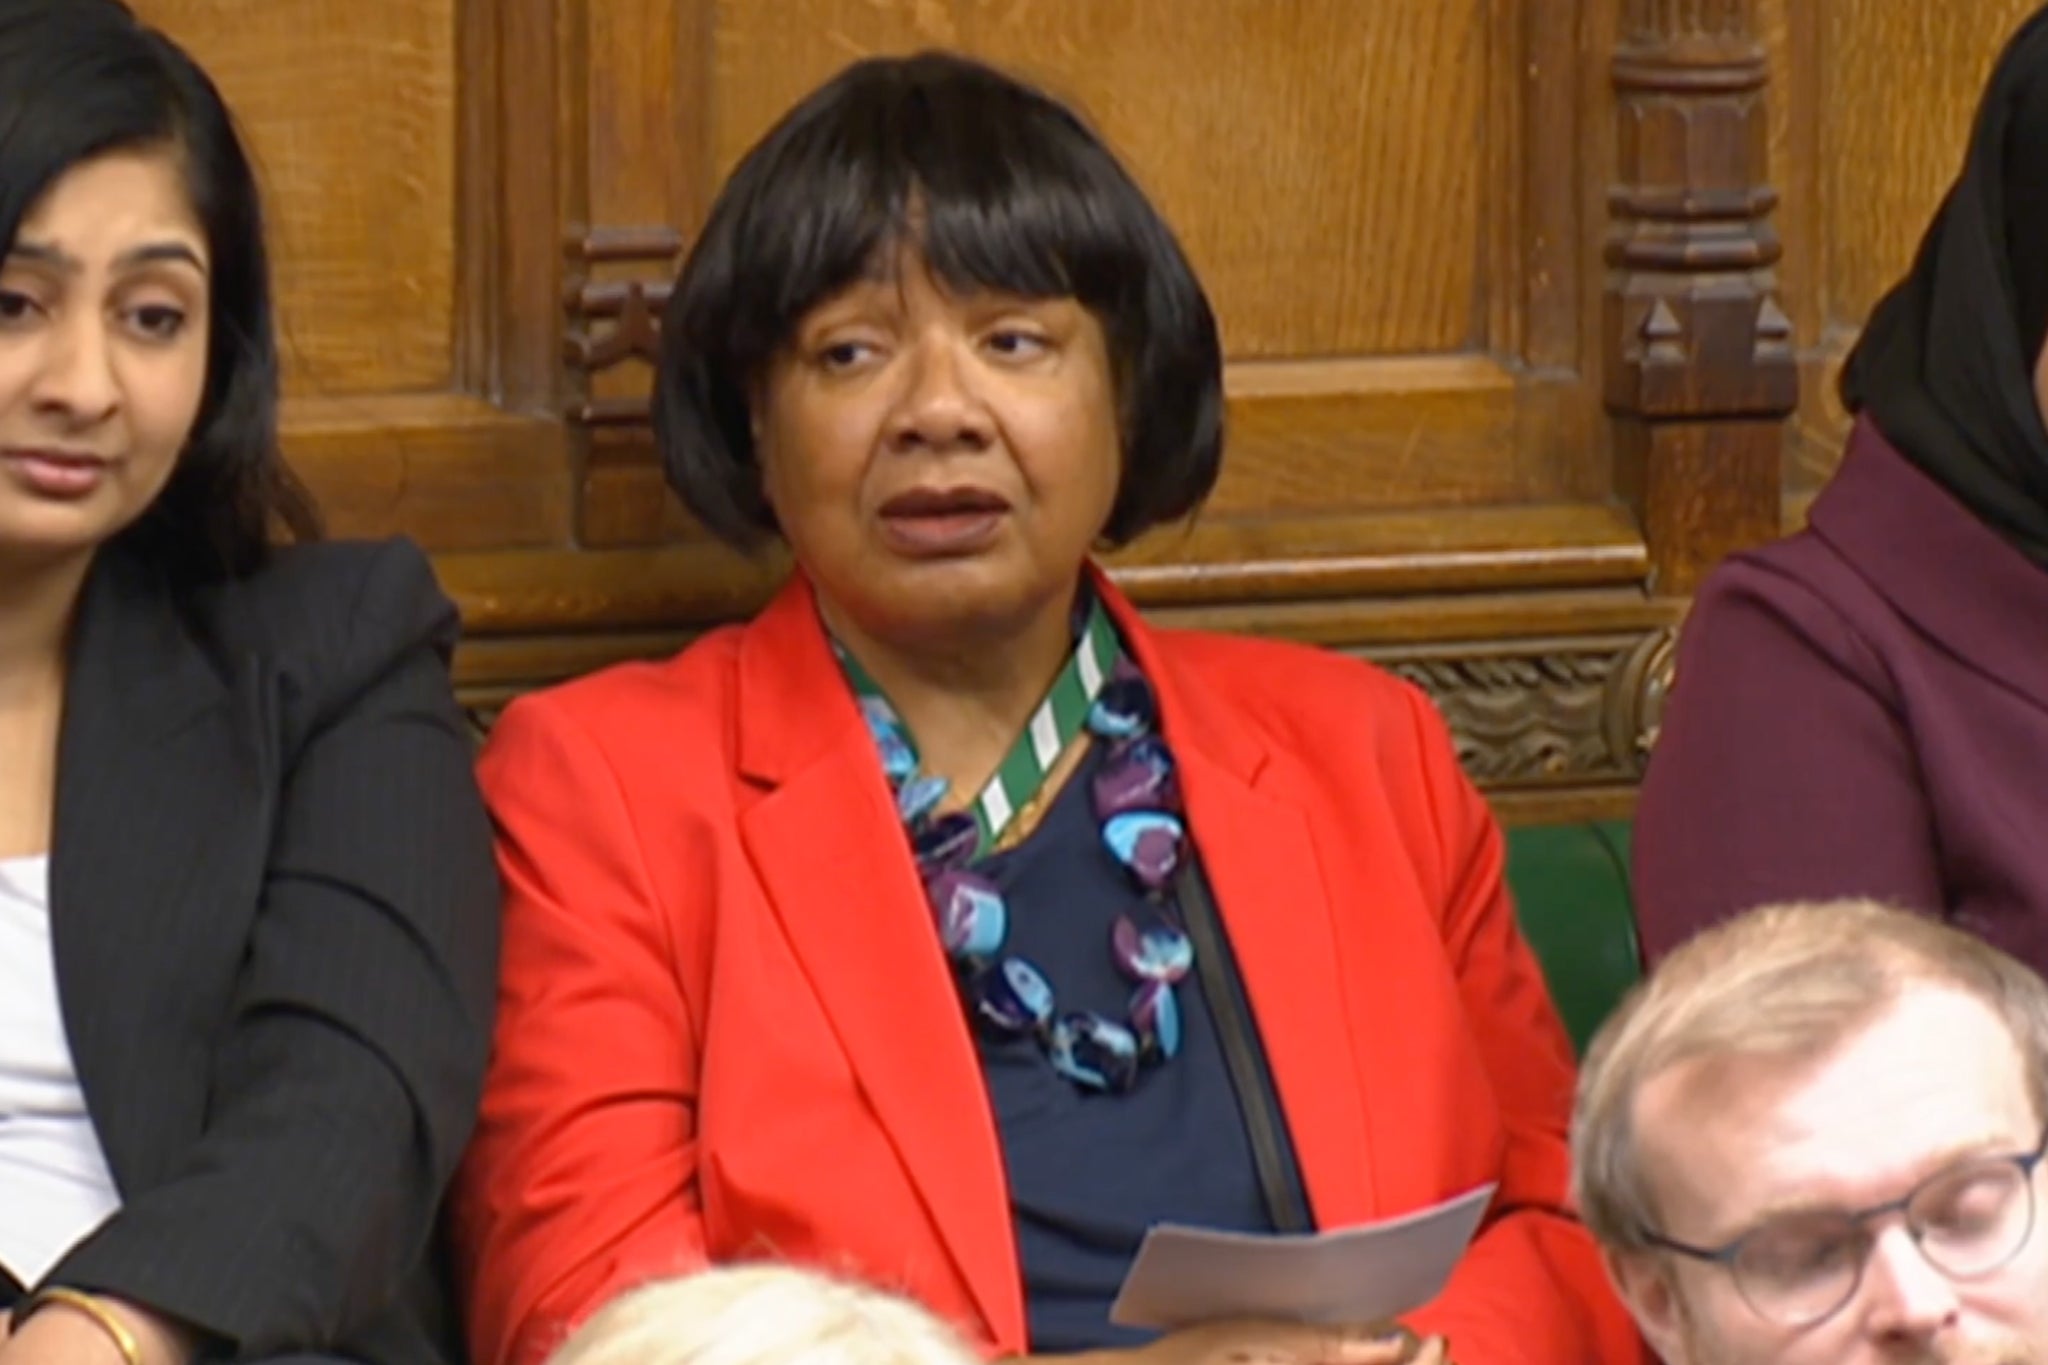 Diane Abbott had a simple message for Keir Starmer this week